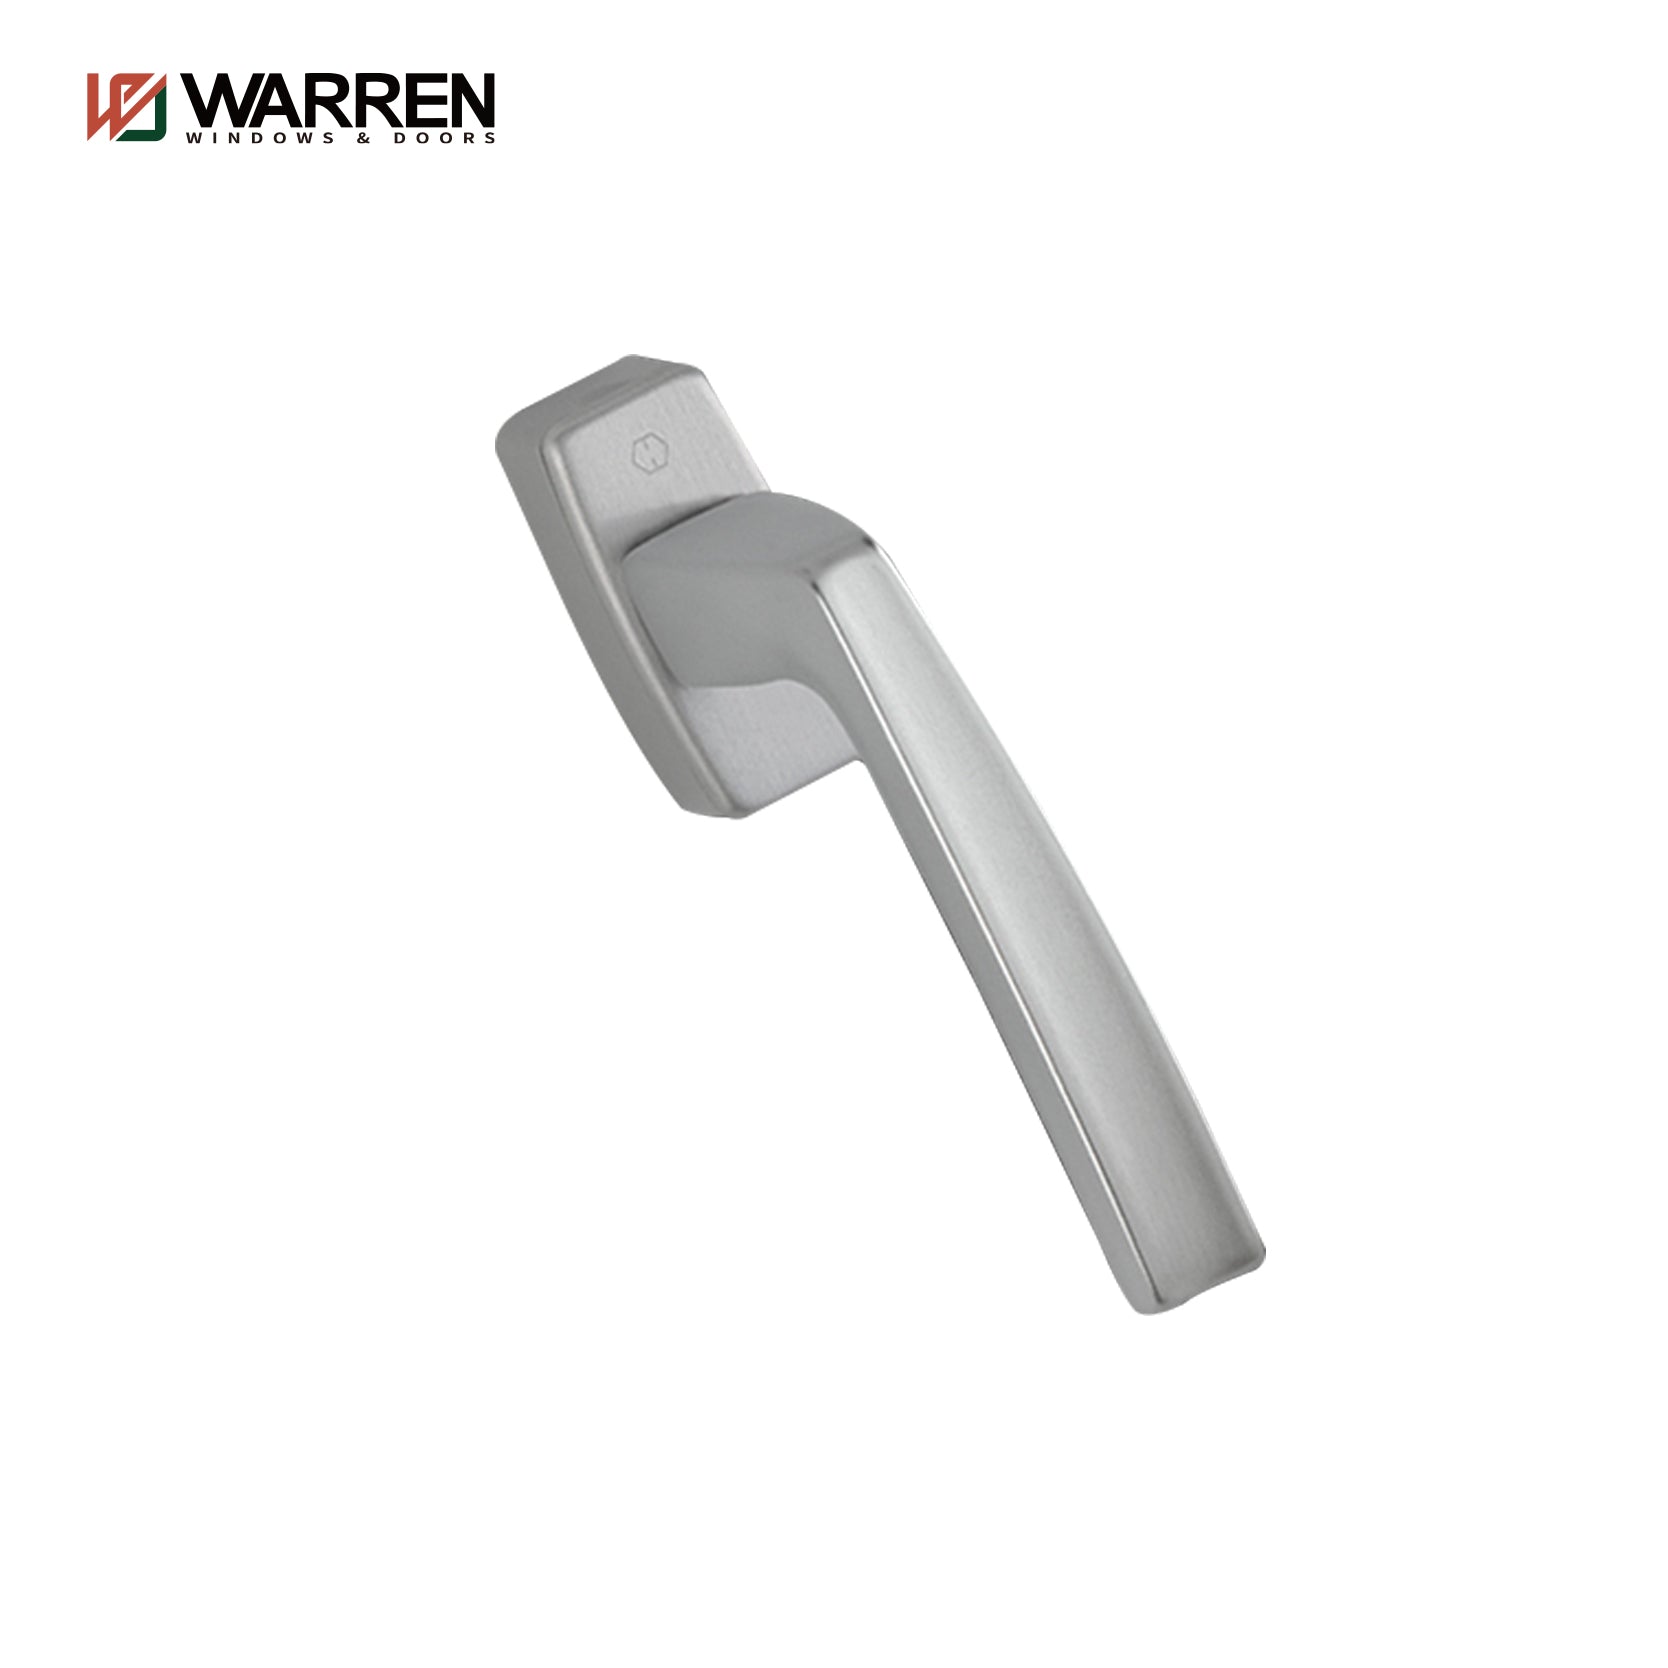 Warren Good Quality Products Aluminium Frame Sliding Glass Window For Various Rooms Of Villa Business Residence